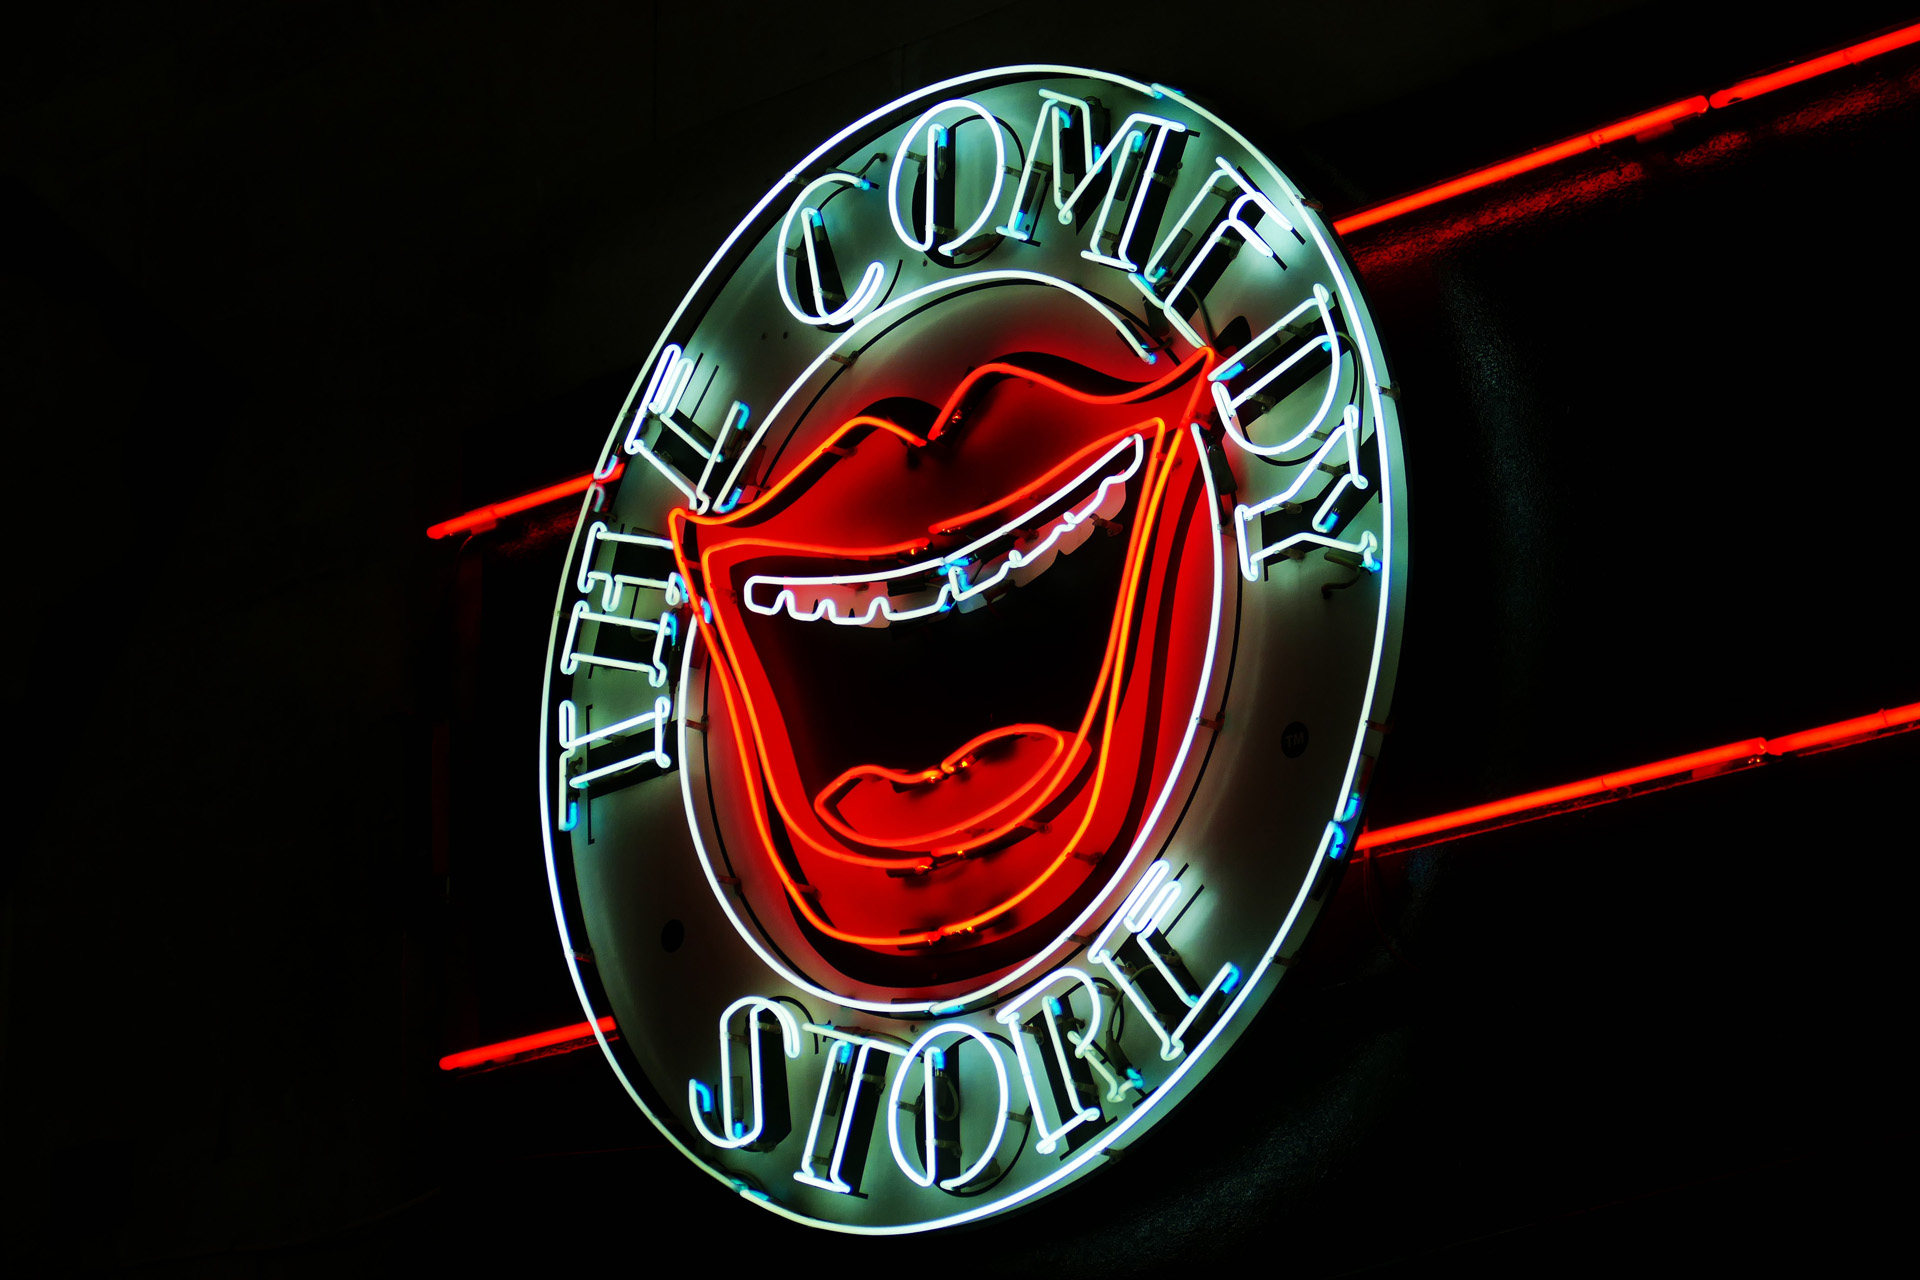 Neon logo for The Comedy Store in London